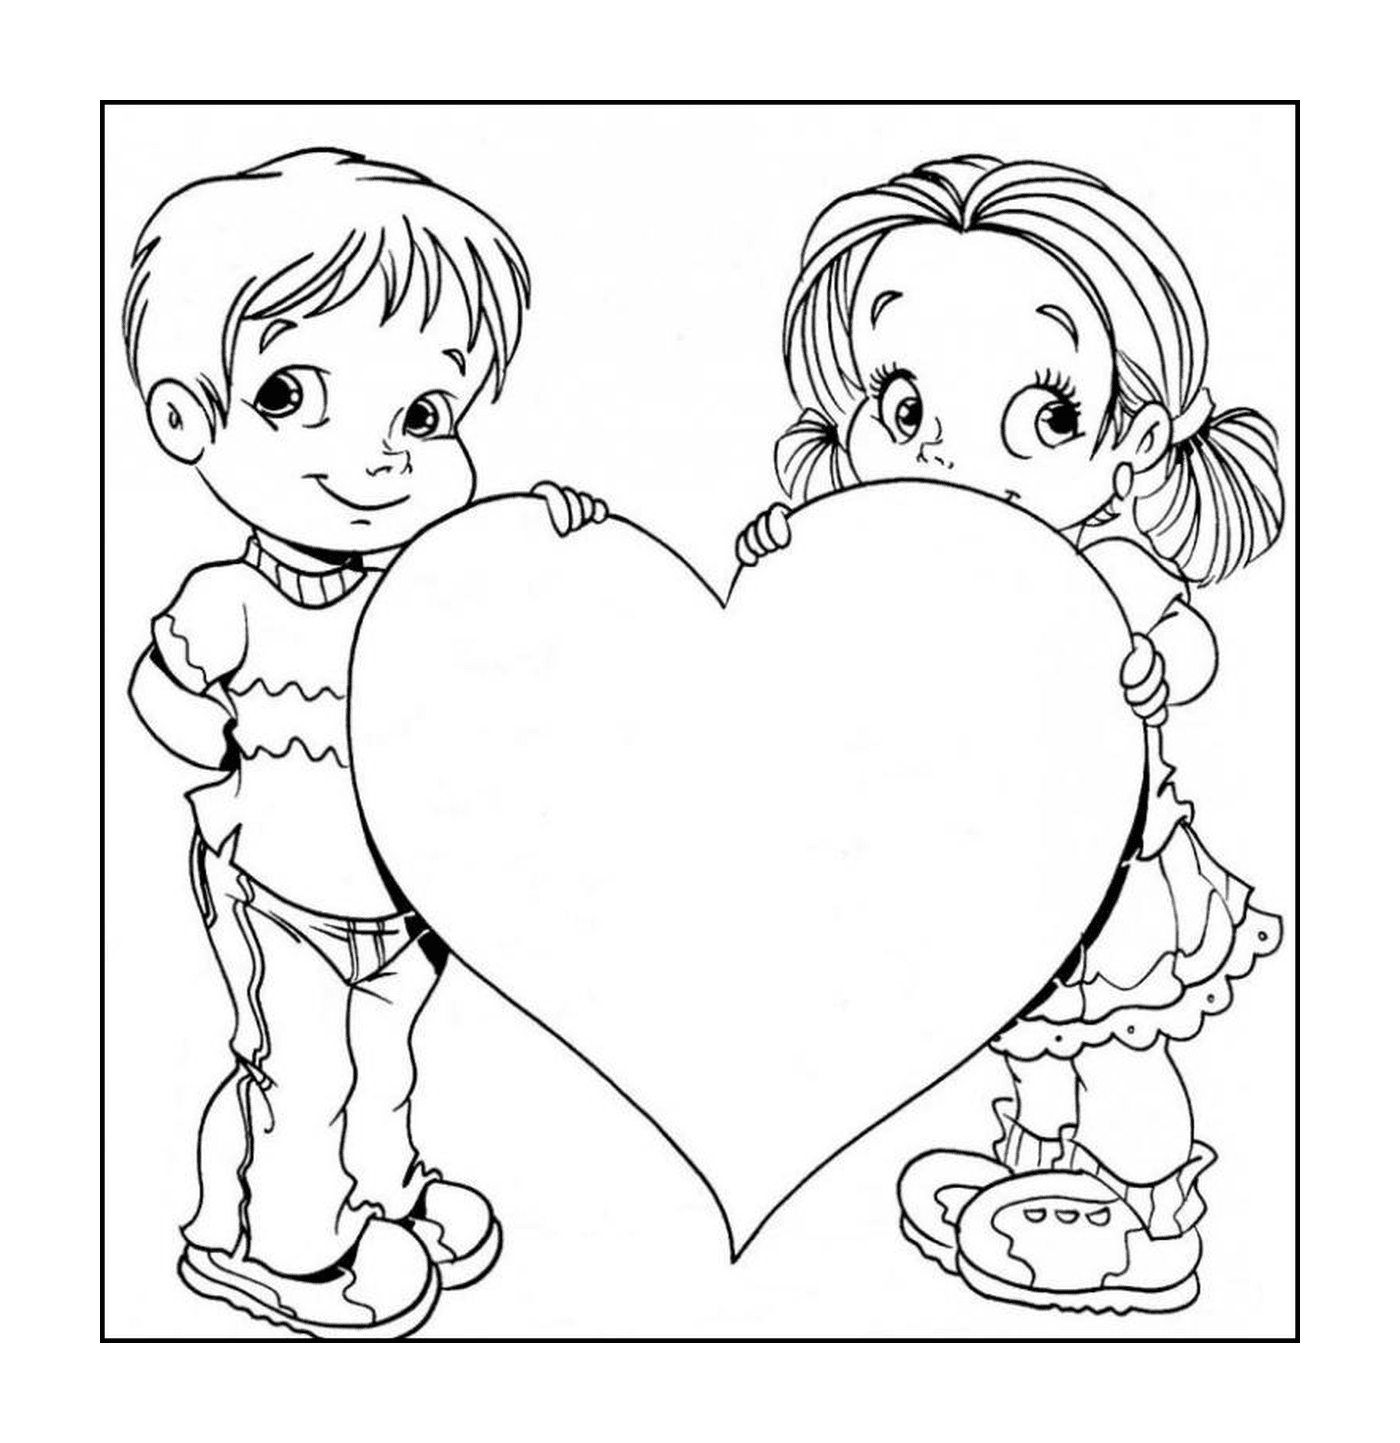  A boy and a girl holding a big heart 